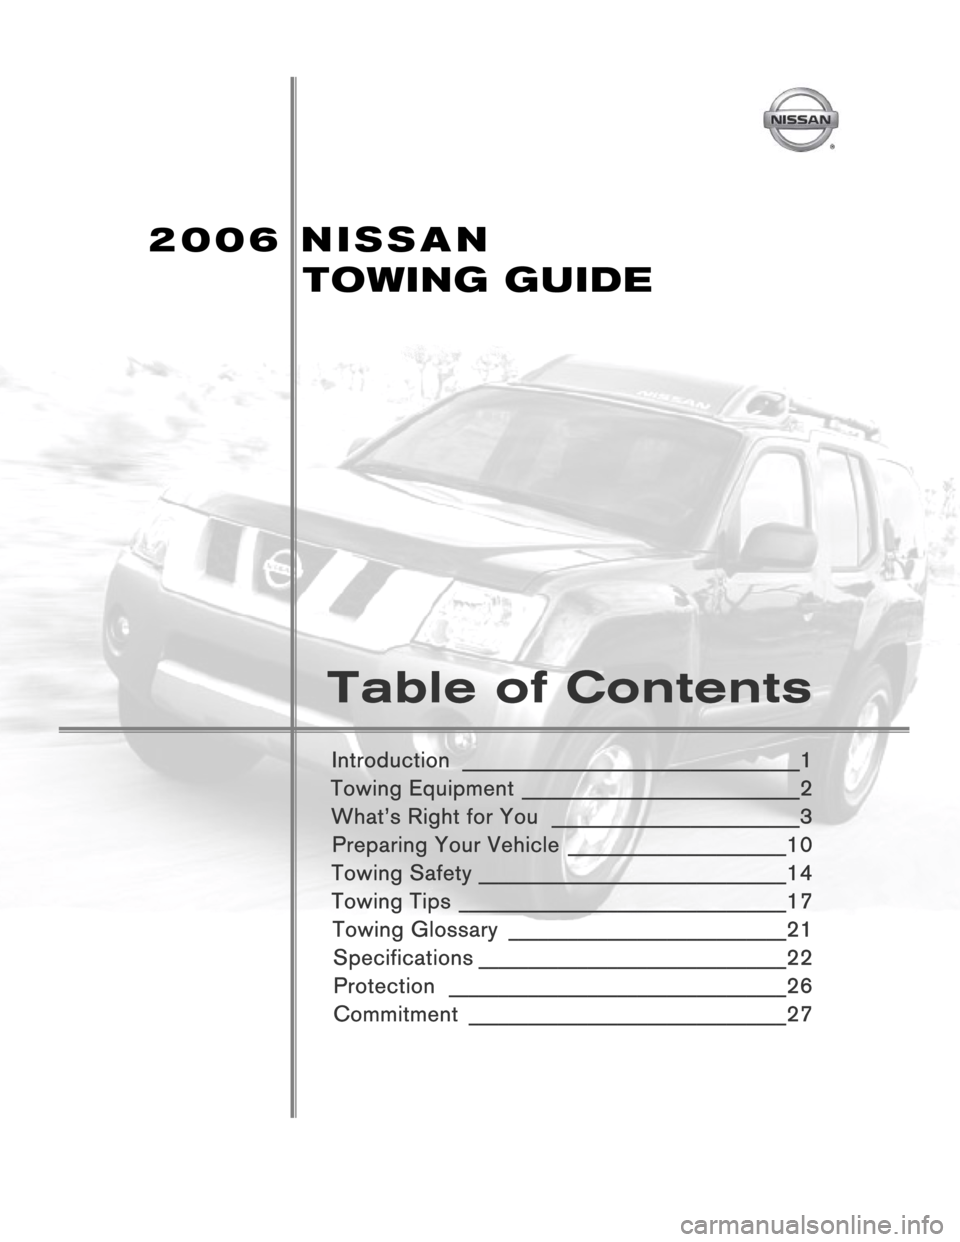 NISSAN SENTRA 2006 B15 / 5.G Towing Guide  
 
 
 
 
 
 
 
 
 
 
 
 
 
 
 
 
 
 
 
 
 
Table of Contents 
 
Introduction __________________________________1 
Towing Equipment
 ____________________________2 
What’s Right for You
 ____________